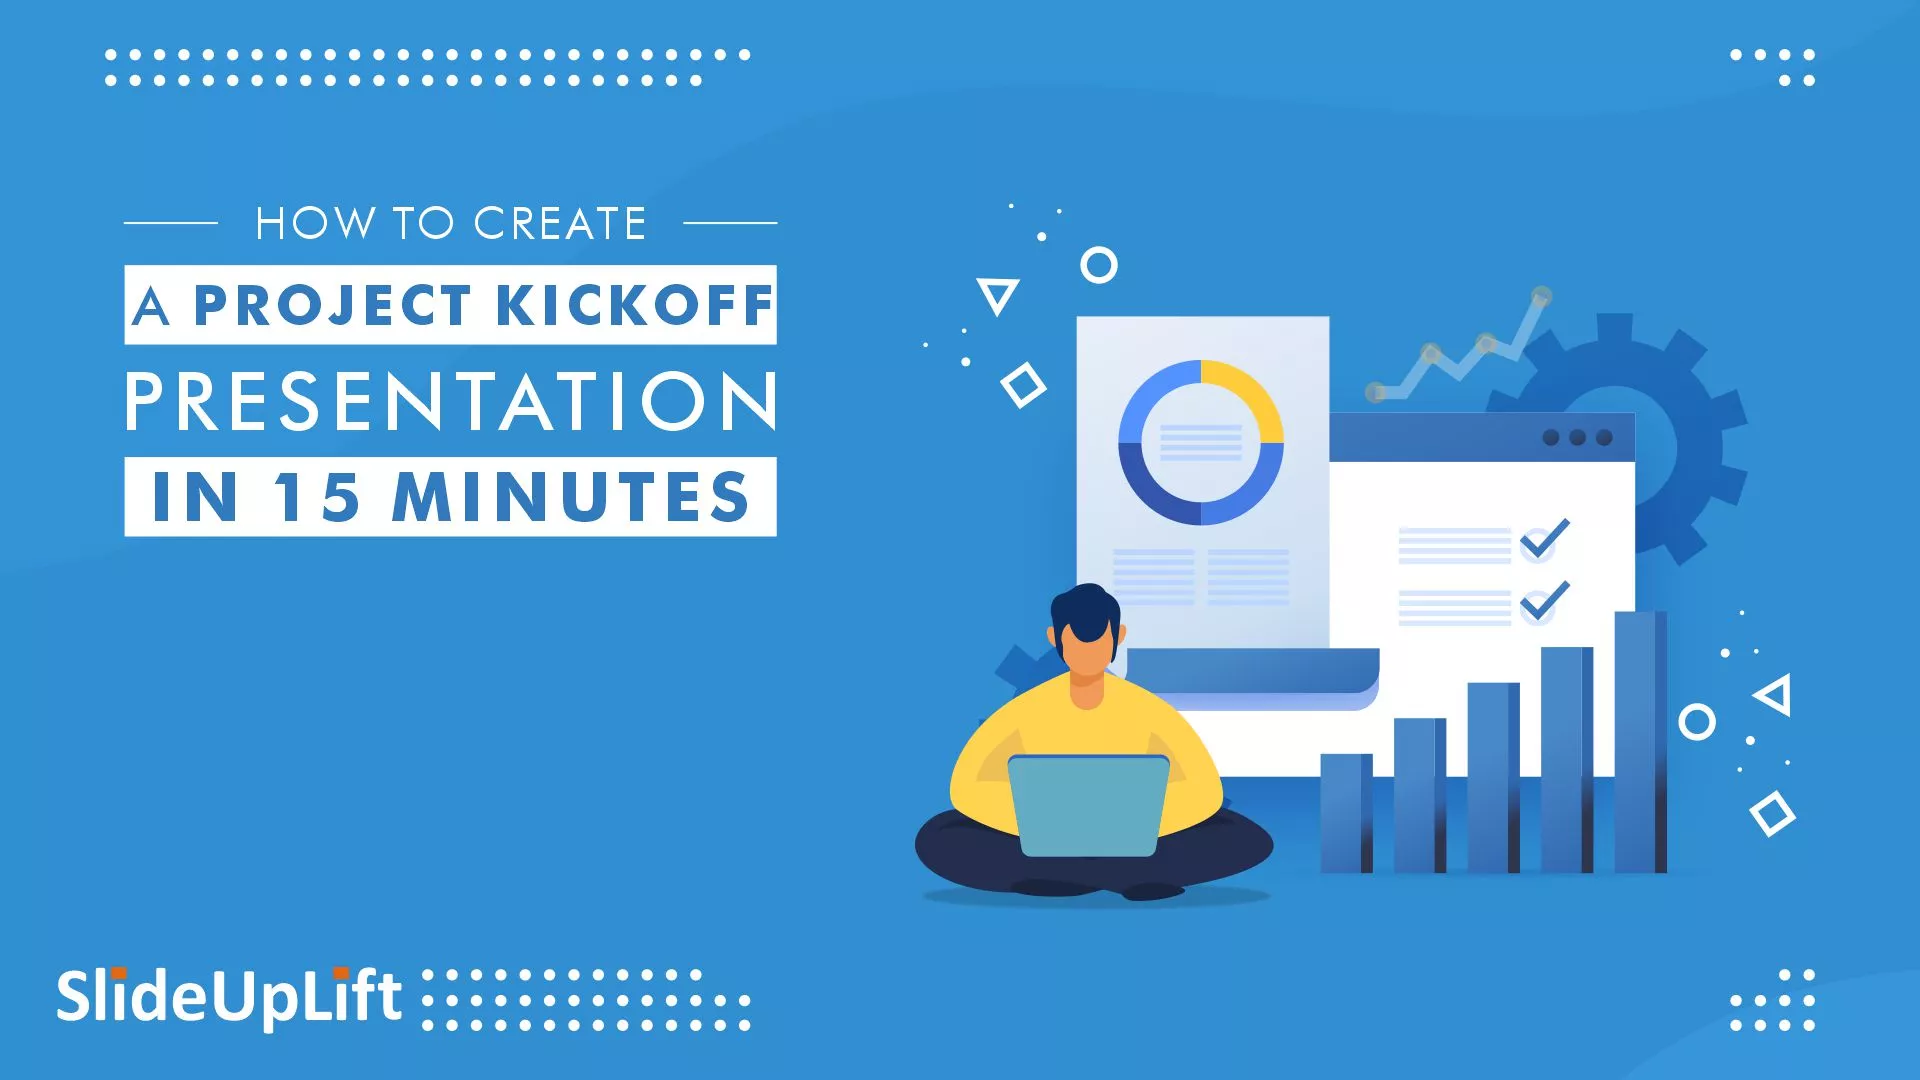 How to create a project kickoff presentation in 15 minutes 